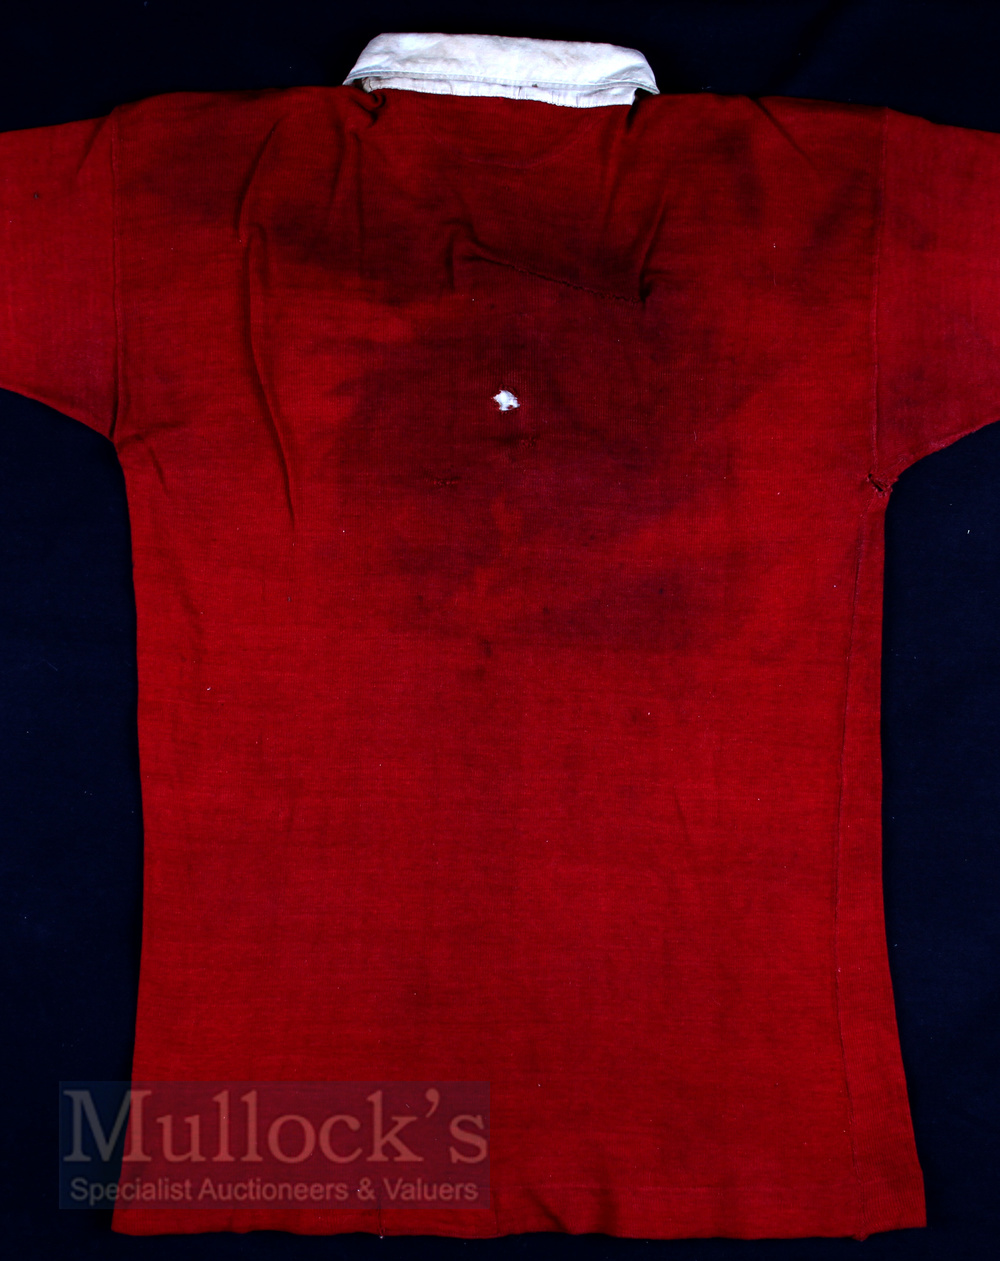 1920s Scarce Wales Scarlet International Rugby Jersey exchanged with Dr A C Gillies - Image 4 of 6